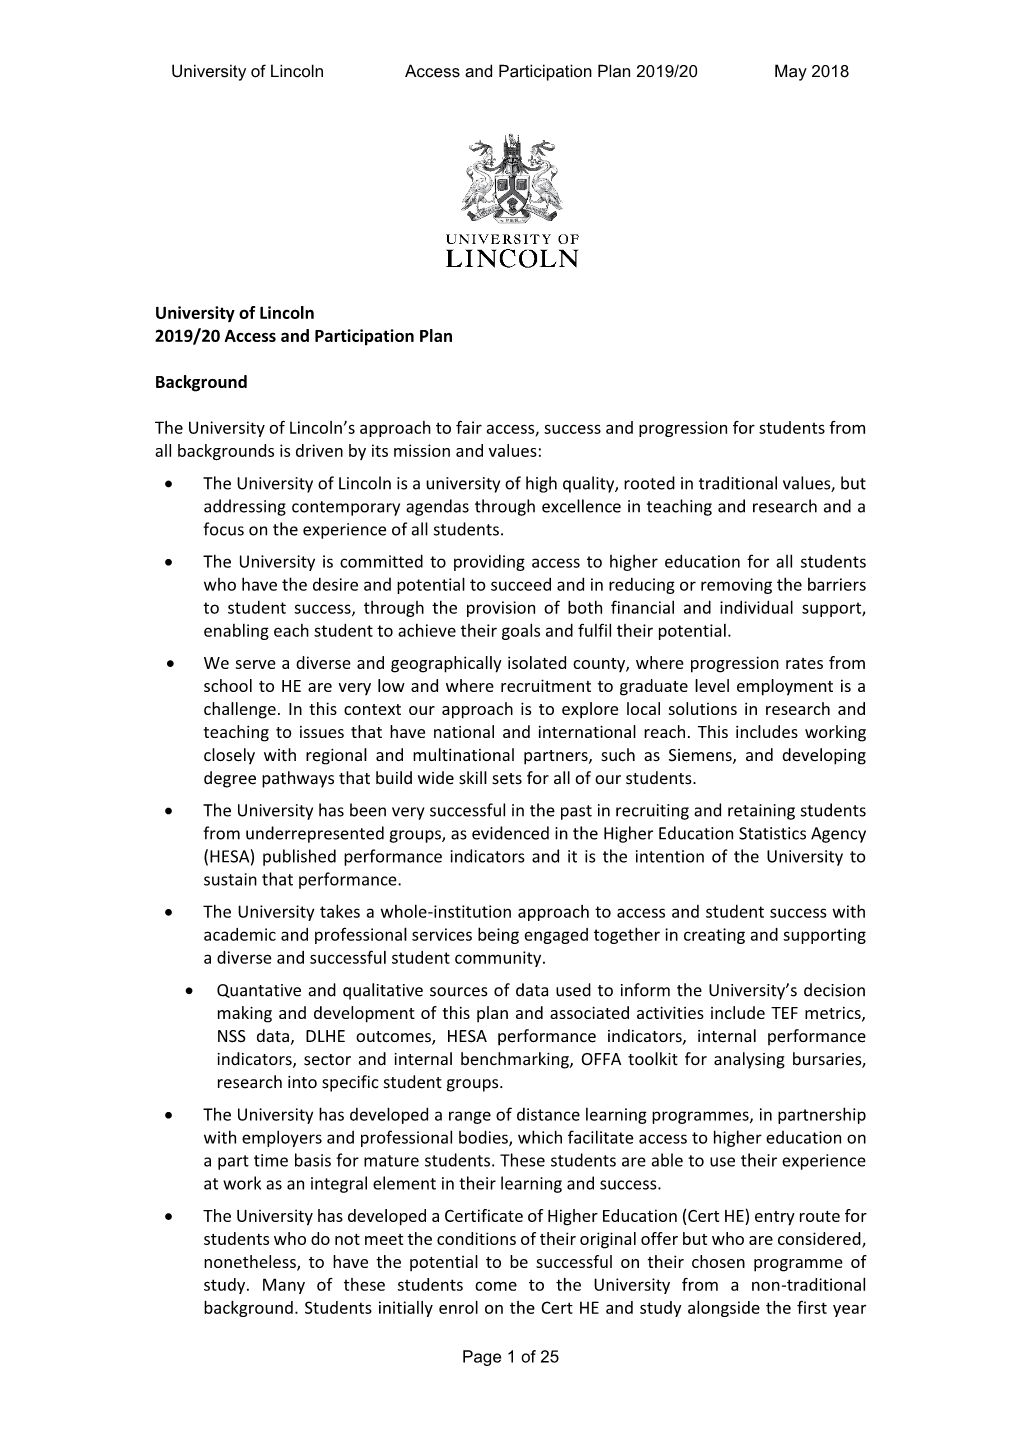 University of Lincoln 2019/20 Access and Participation Plan Background the University of Lincoln's Approach to Fair Access, Su